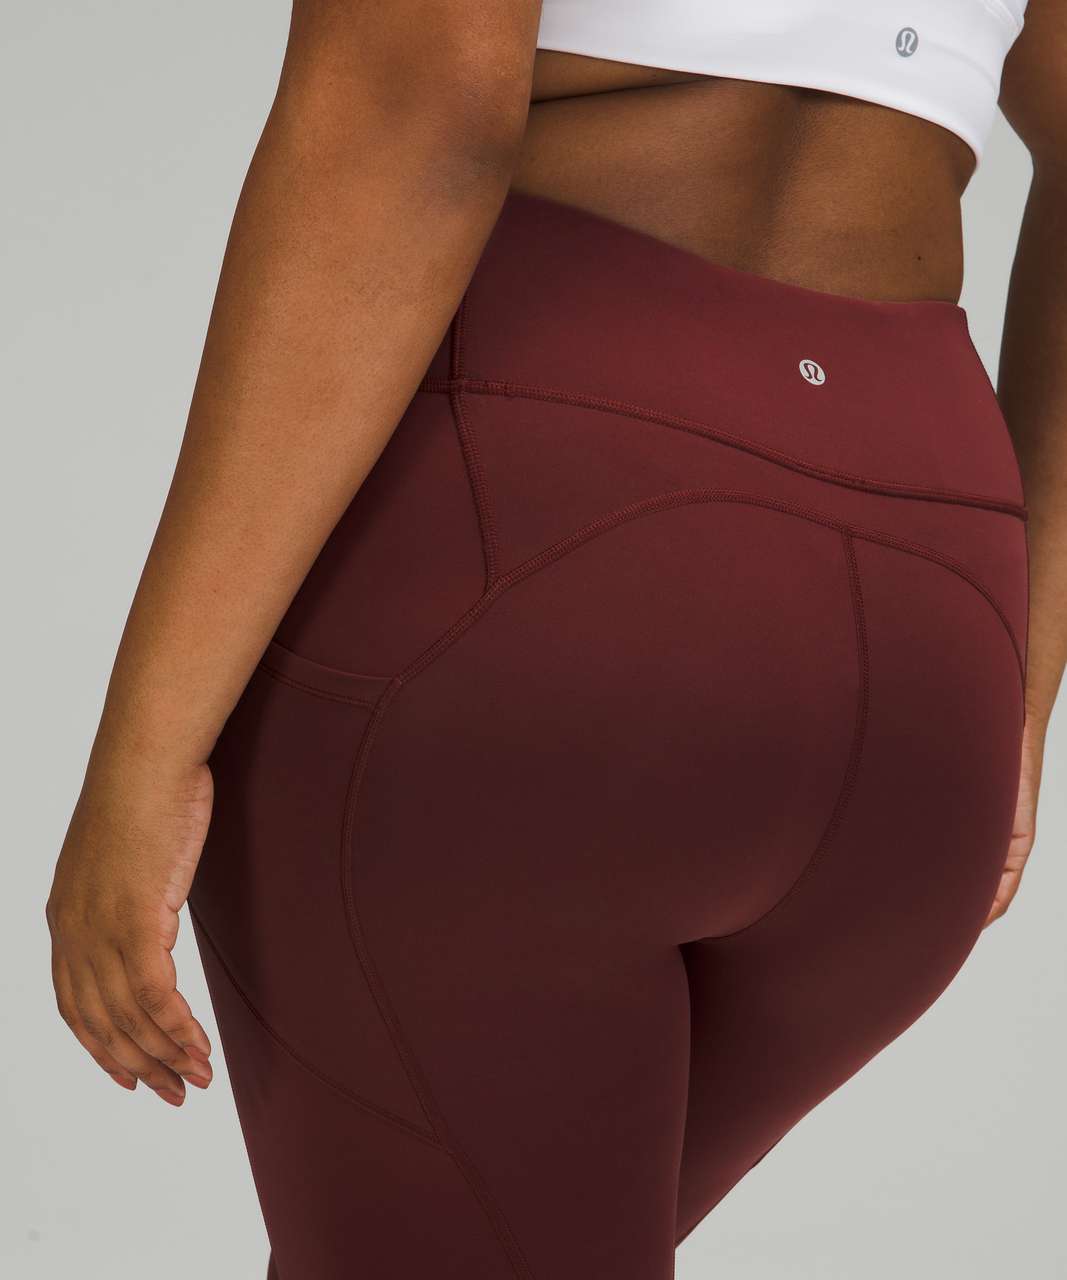 Lululemon All The Right Places Crop *23" - Red Merlot